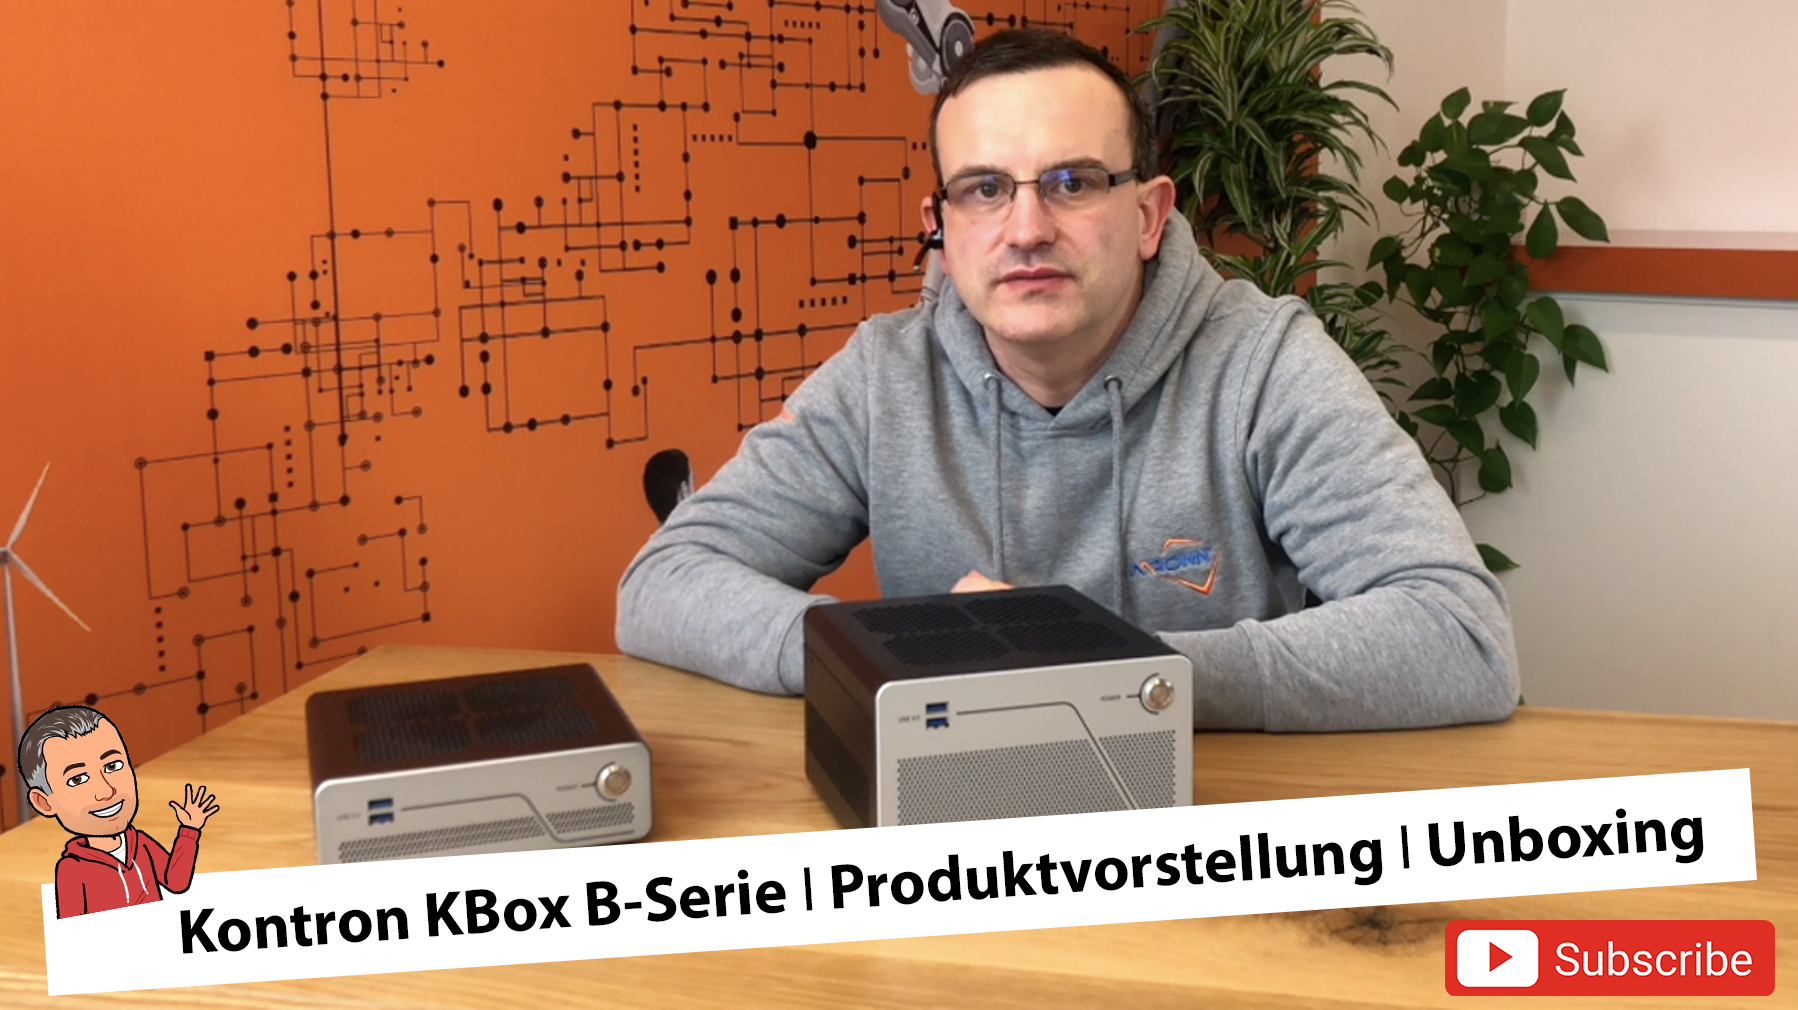 You are currently viewing Kontron KBox B-Serie I Produktvorstellung I Unboxing